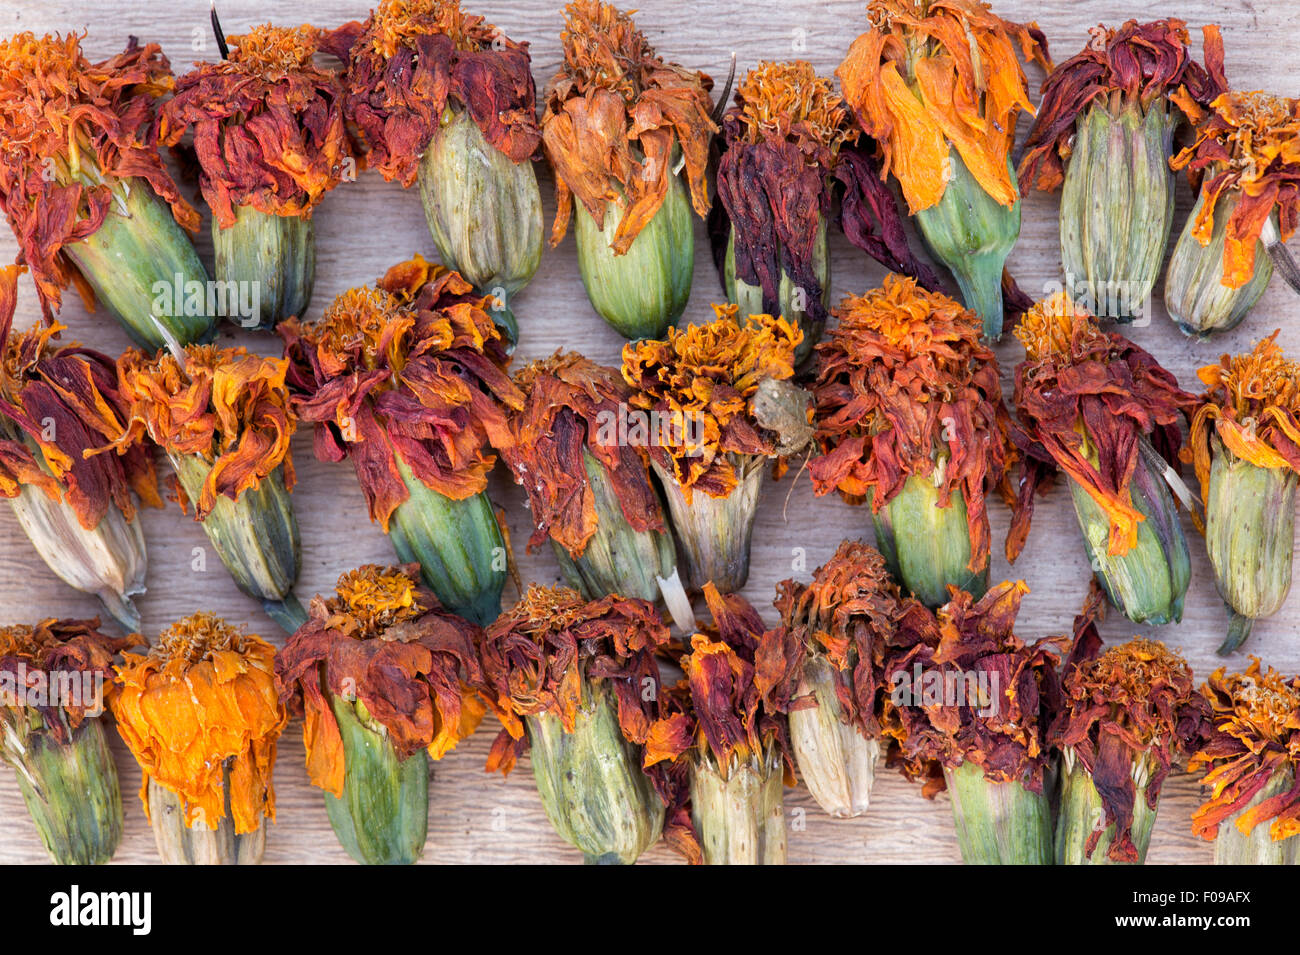 Tagetes. Marigold dried flower heads for seed collecting and storing Stock Photo